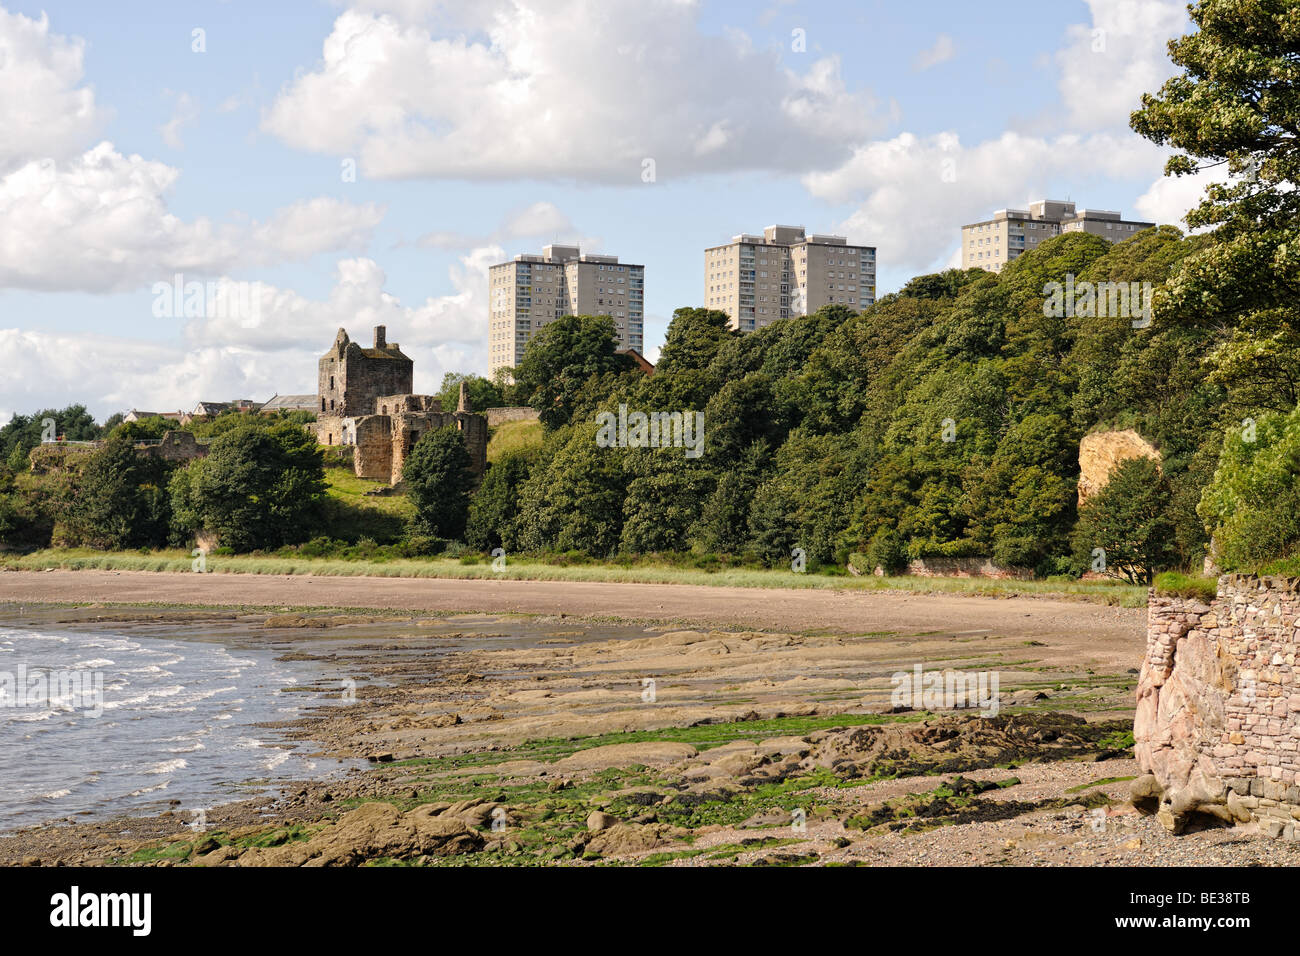 Ravenscraig Castle, on the Firth of Forth, Kircaldy, Fife, Scotland, UK Stock Photo